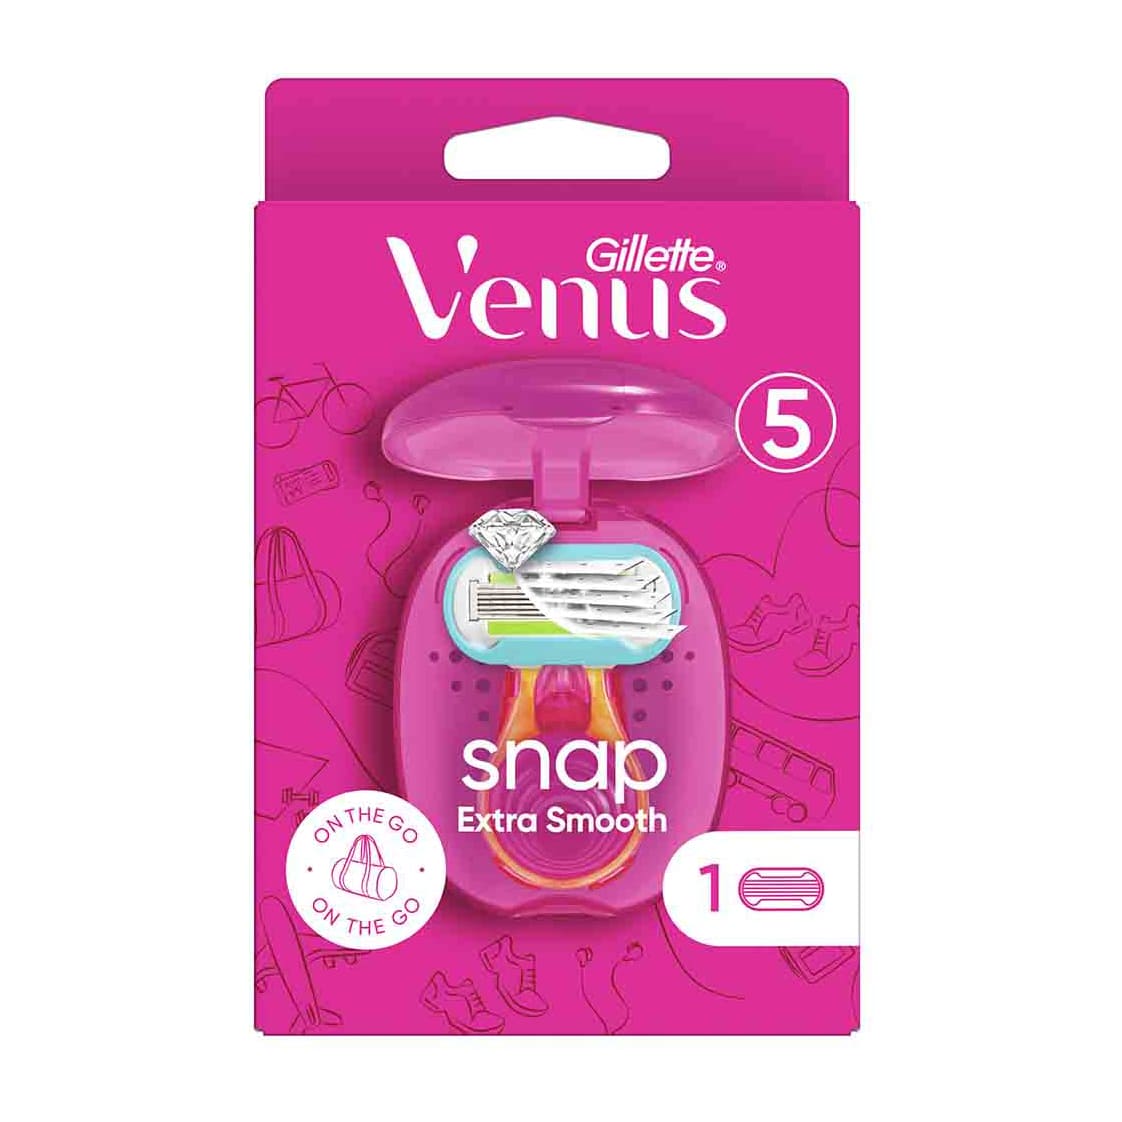 Gillette Venus Snap Extra Smooth Travel Size 1 Blade - Pink - Bloom Pharmacy